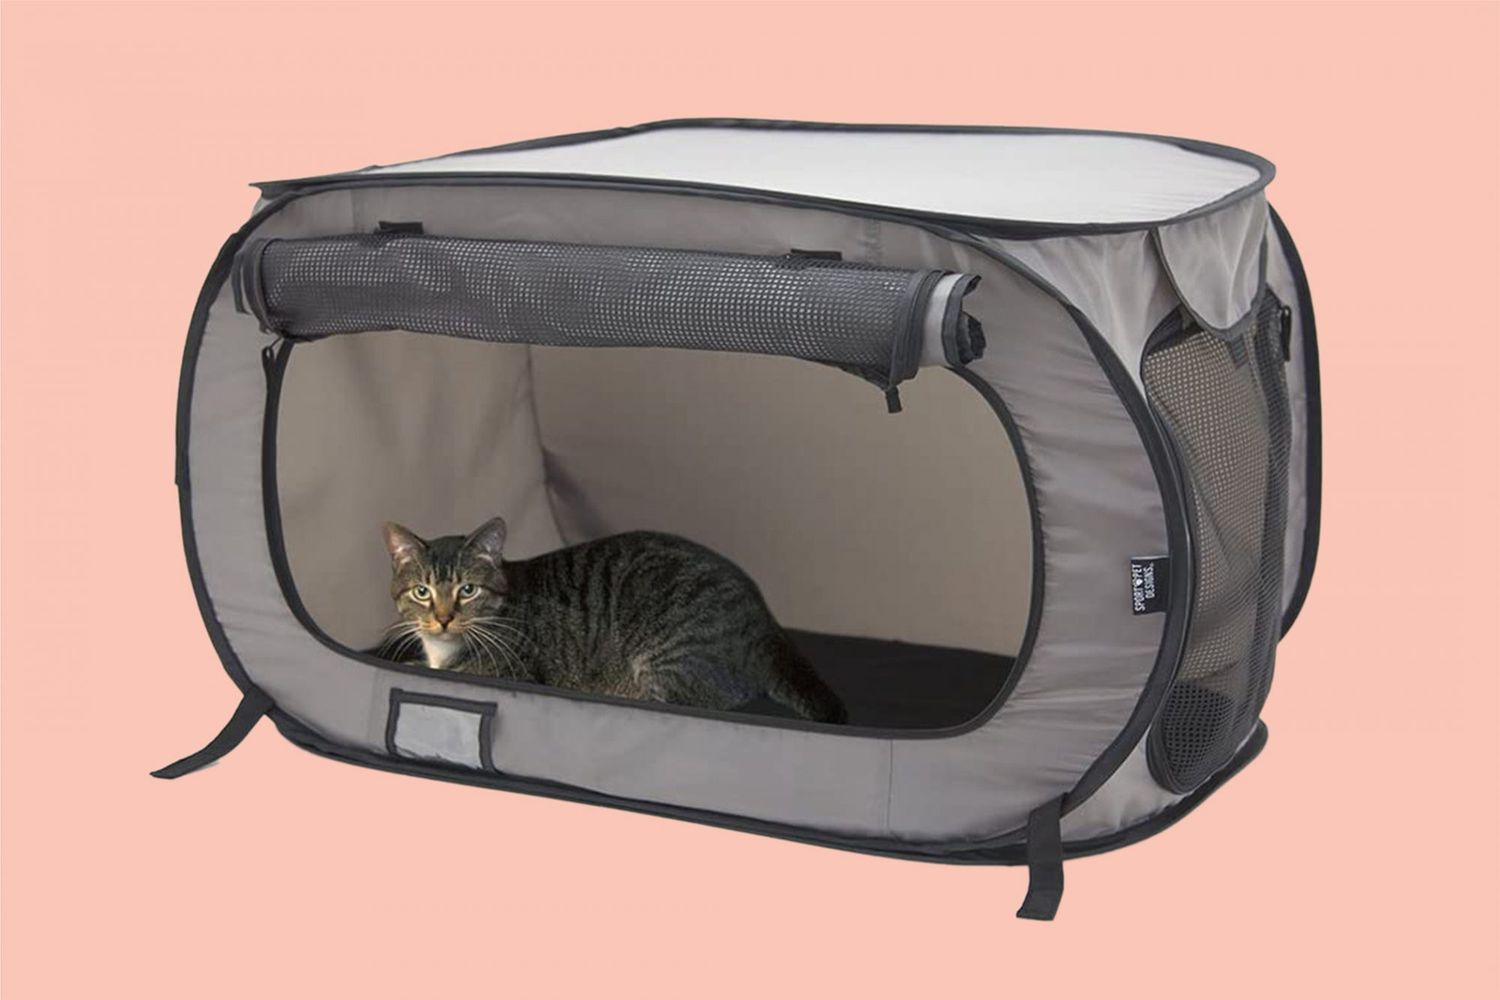 10 Cat Kennels That Will Keep Your Feline Friend Calm, Comfortable, and Safe